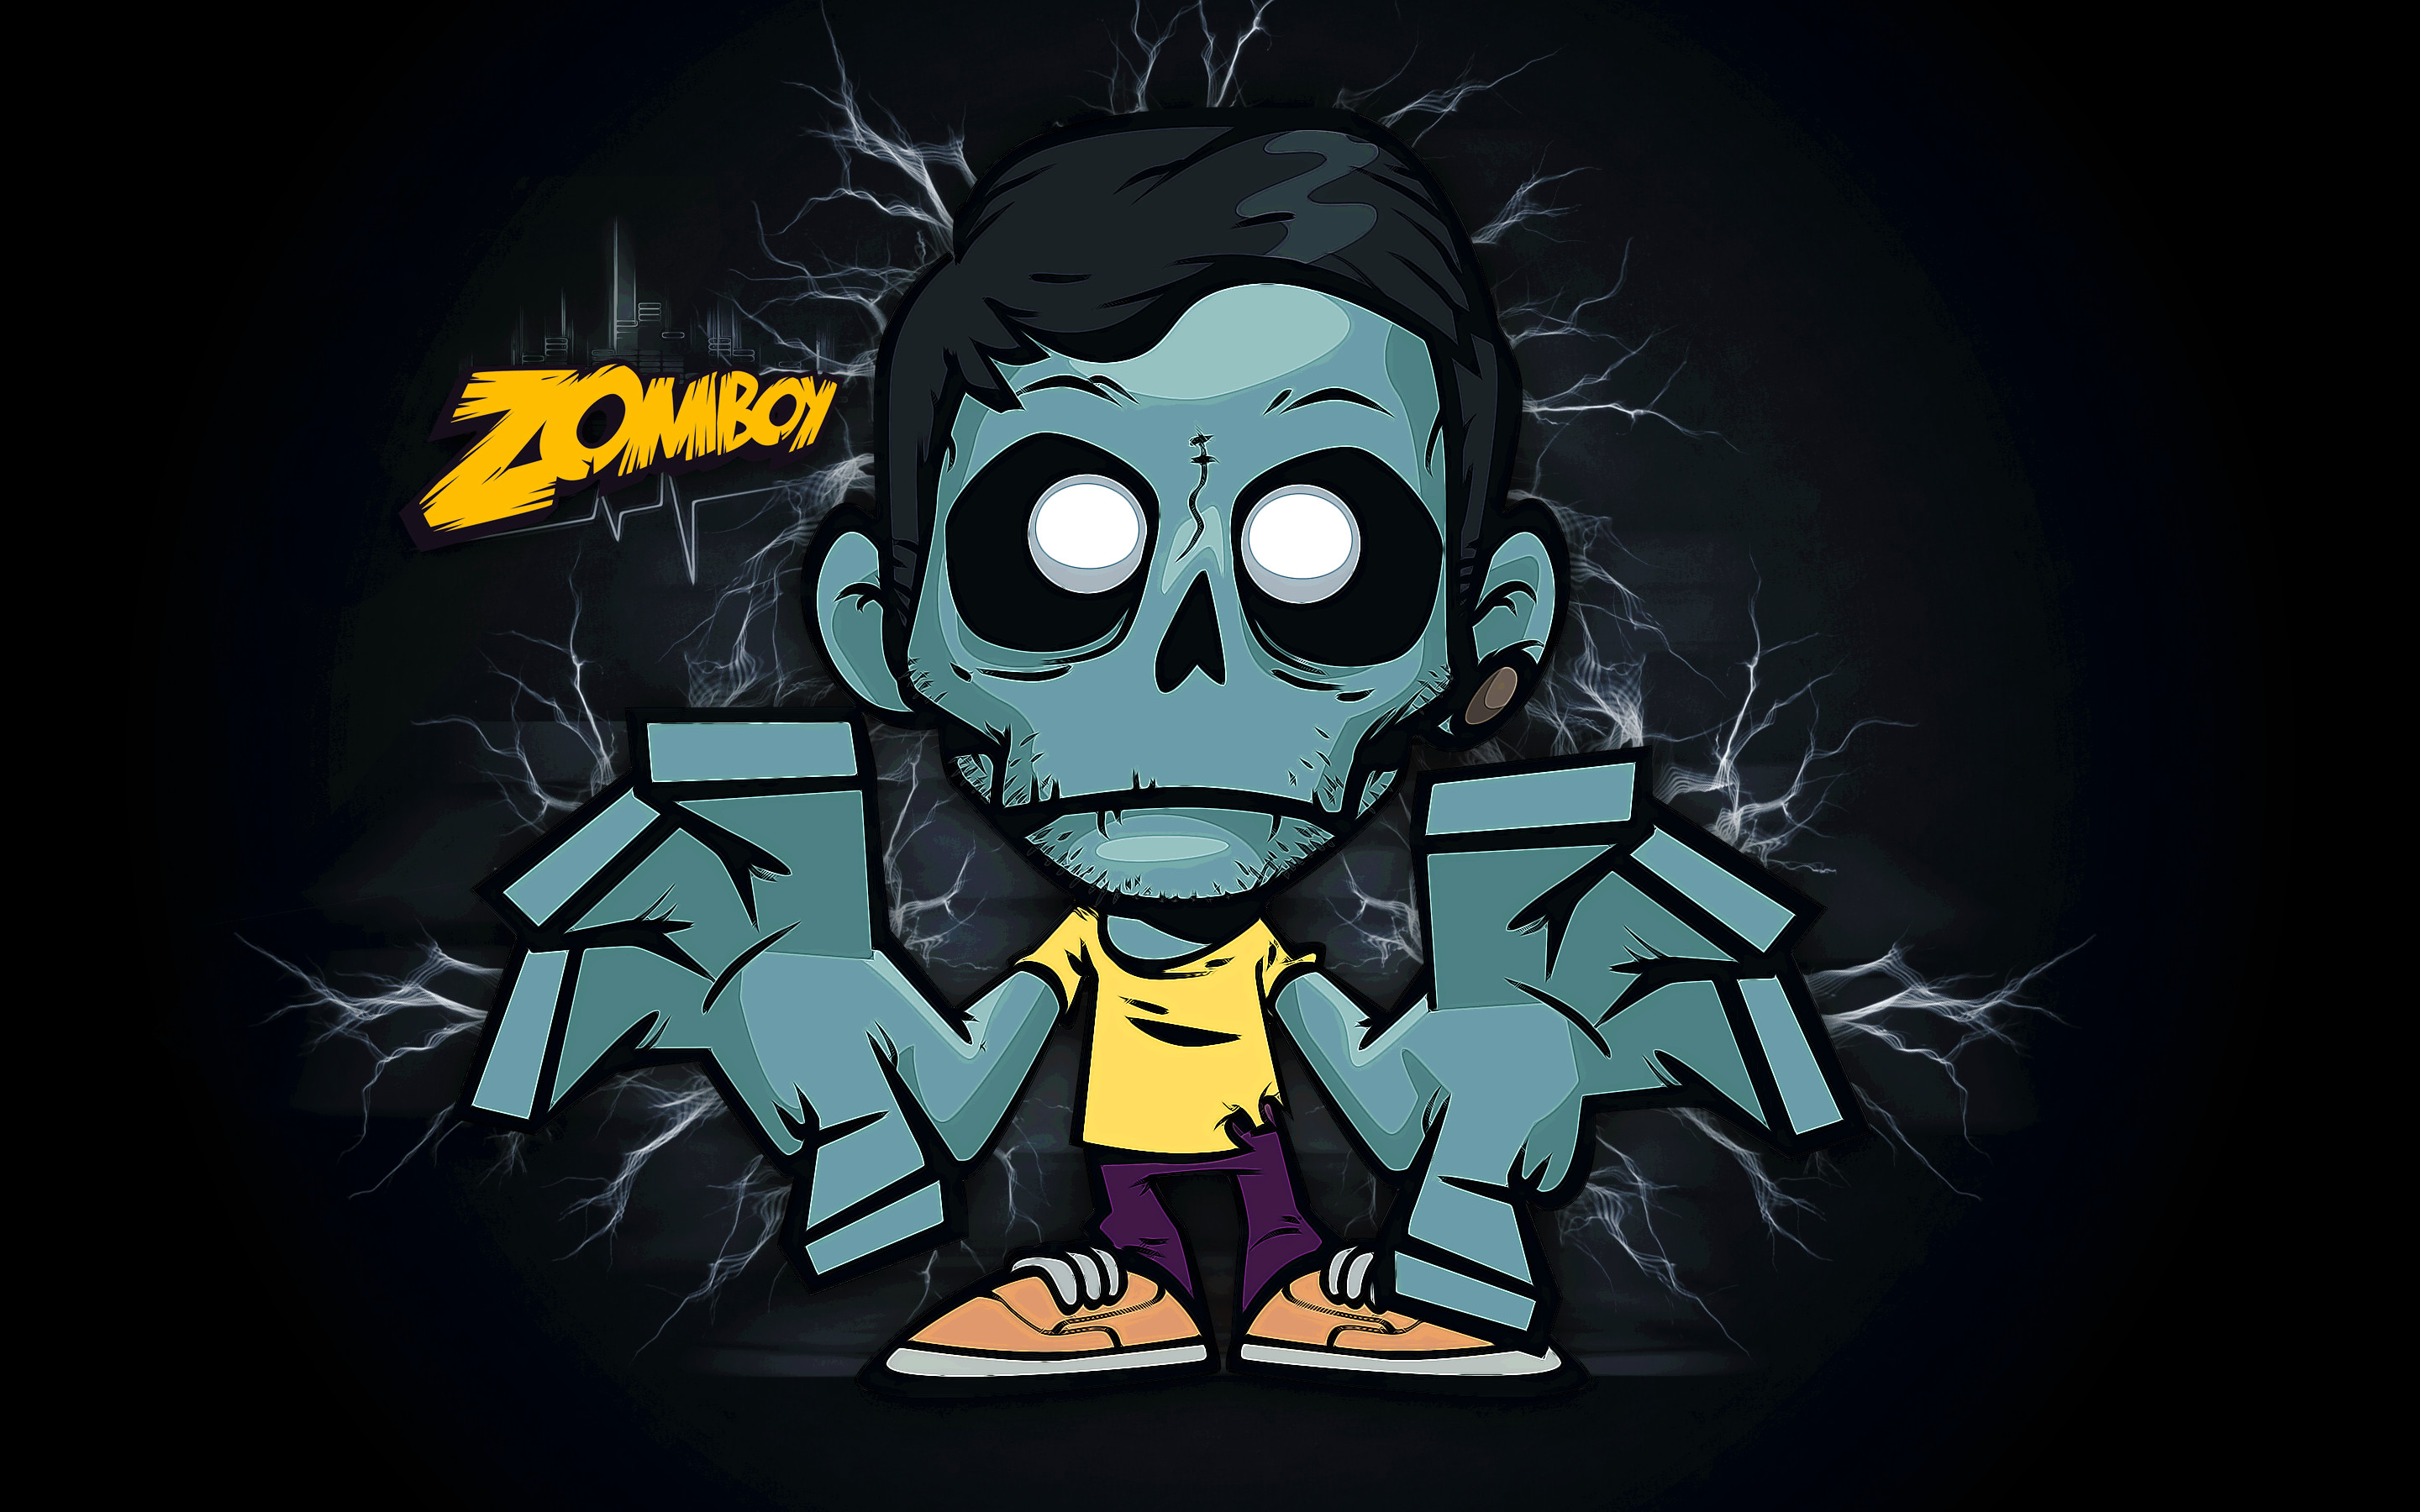 2880x1800 Wallpaper Zomboy by TehReal Wallpaper Zomboy by TehReal